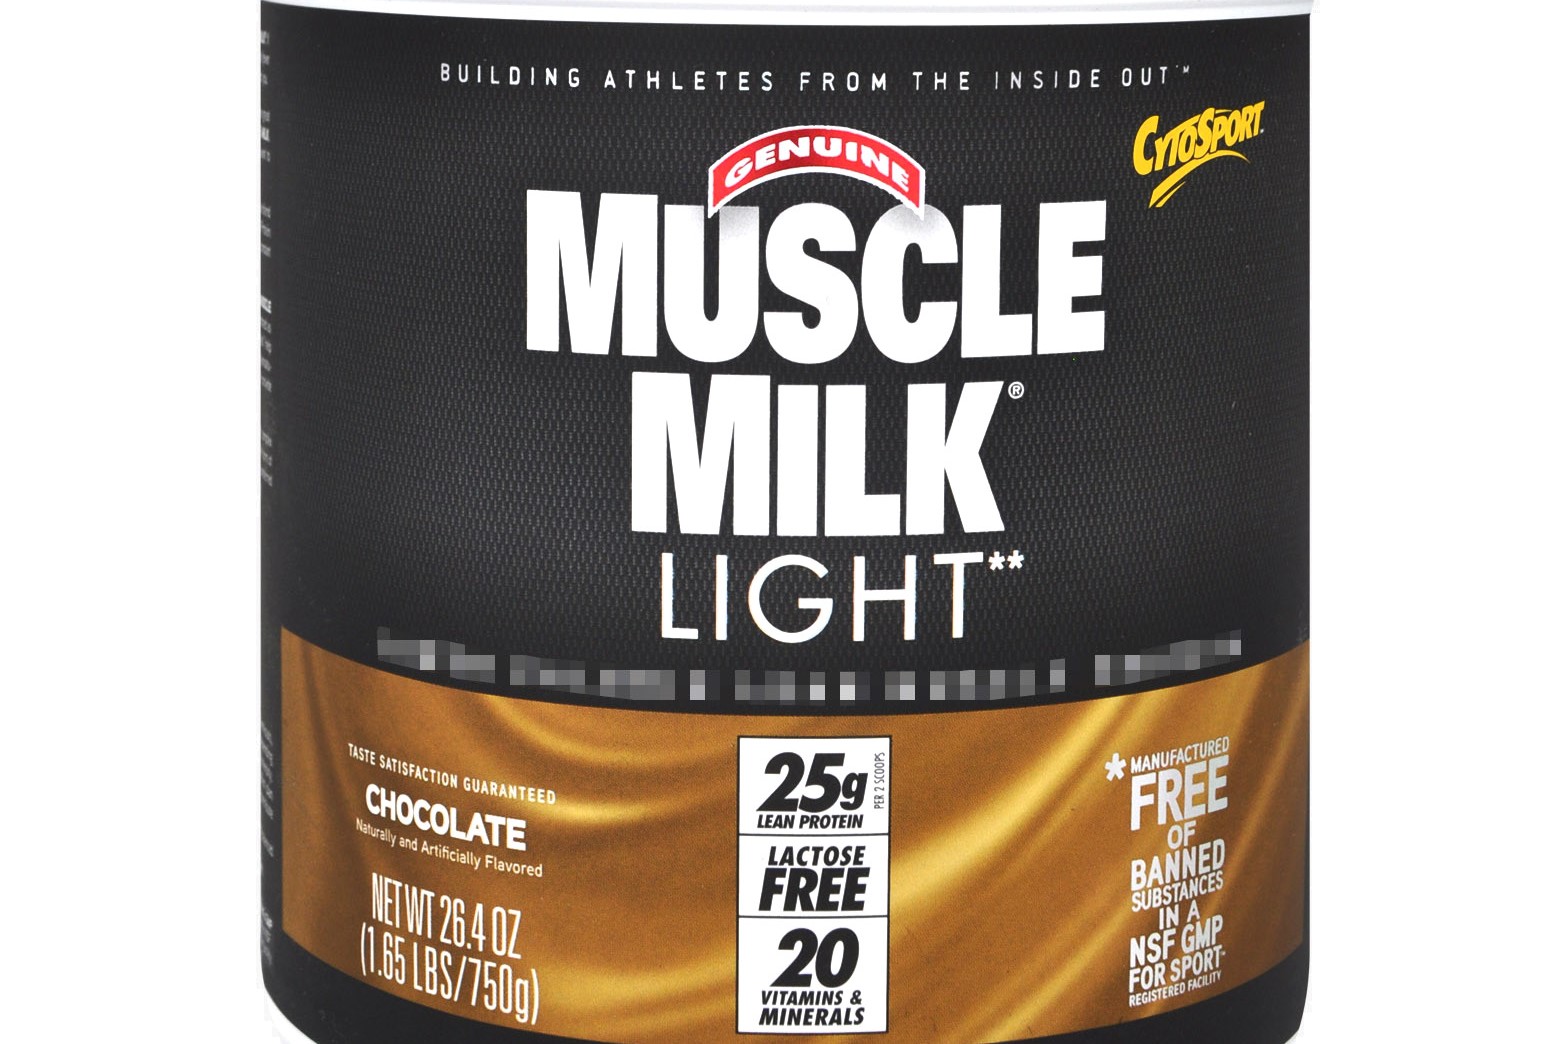 15-muscle-milk-light-nutrition-facts